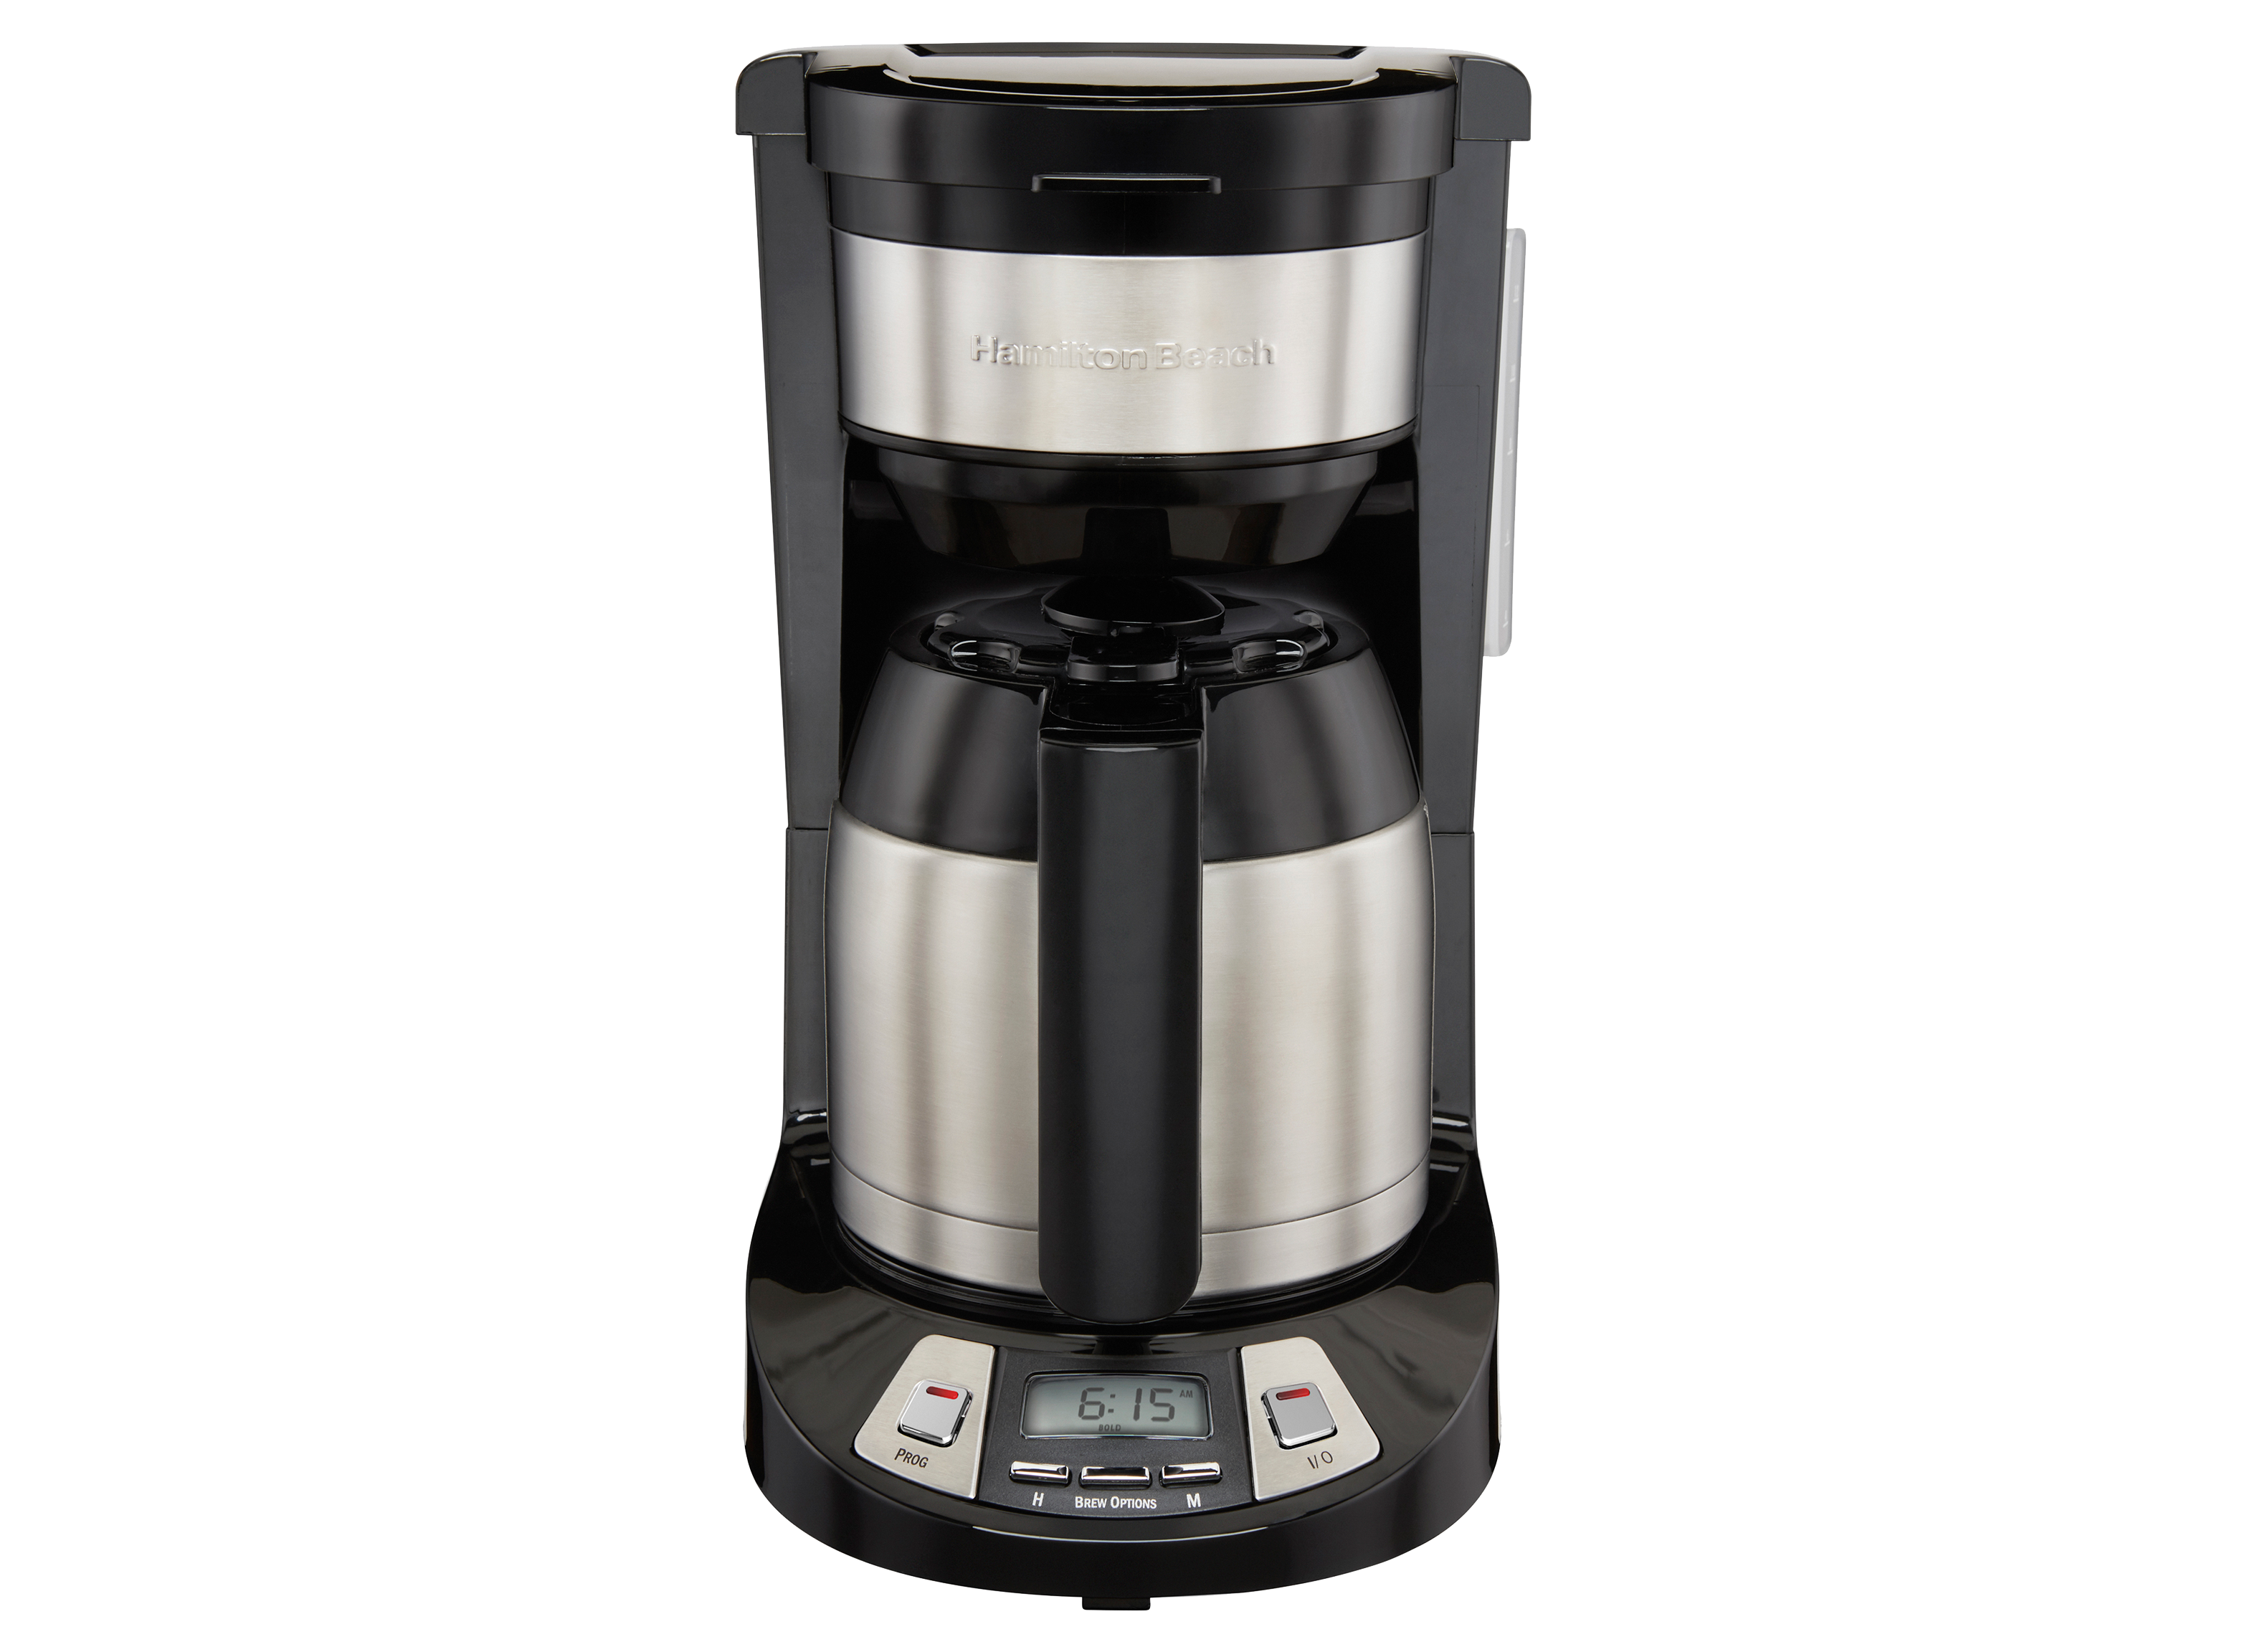 https://crdms.images.consumerreports.org/prod/products/cr/models/404048-drip-coffee-makers-with-carafe-hamilton-beach-programmable-8-cup-46240-10021149.png